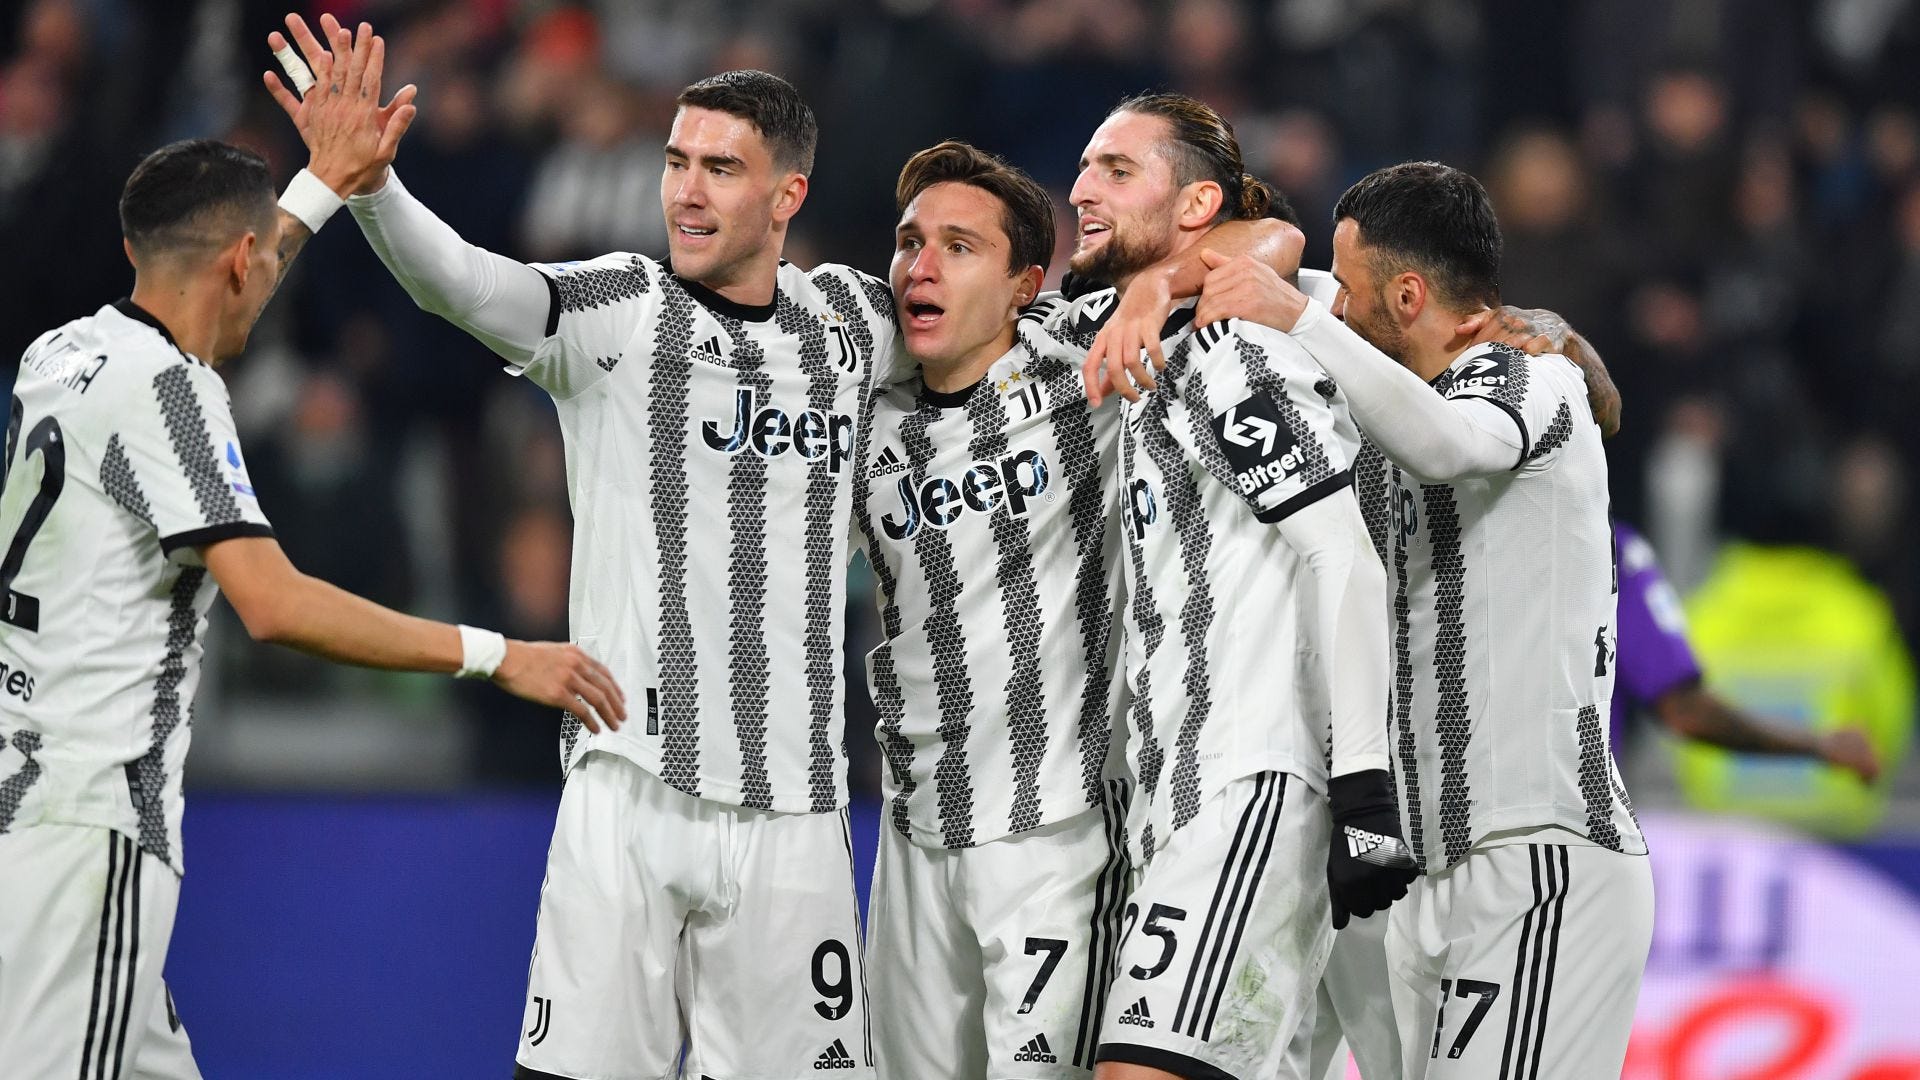 Spezia vs Juventus Live stream, TV channel, kick-off time and where to watch Goal US